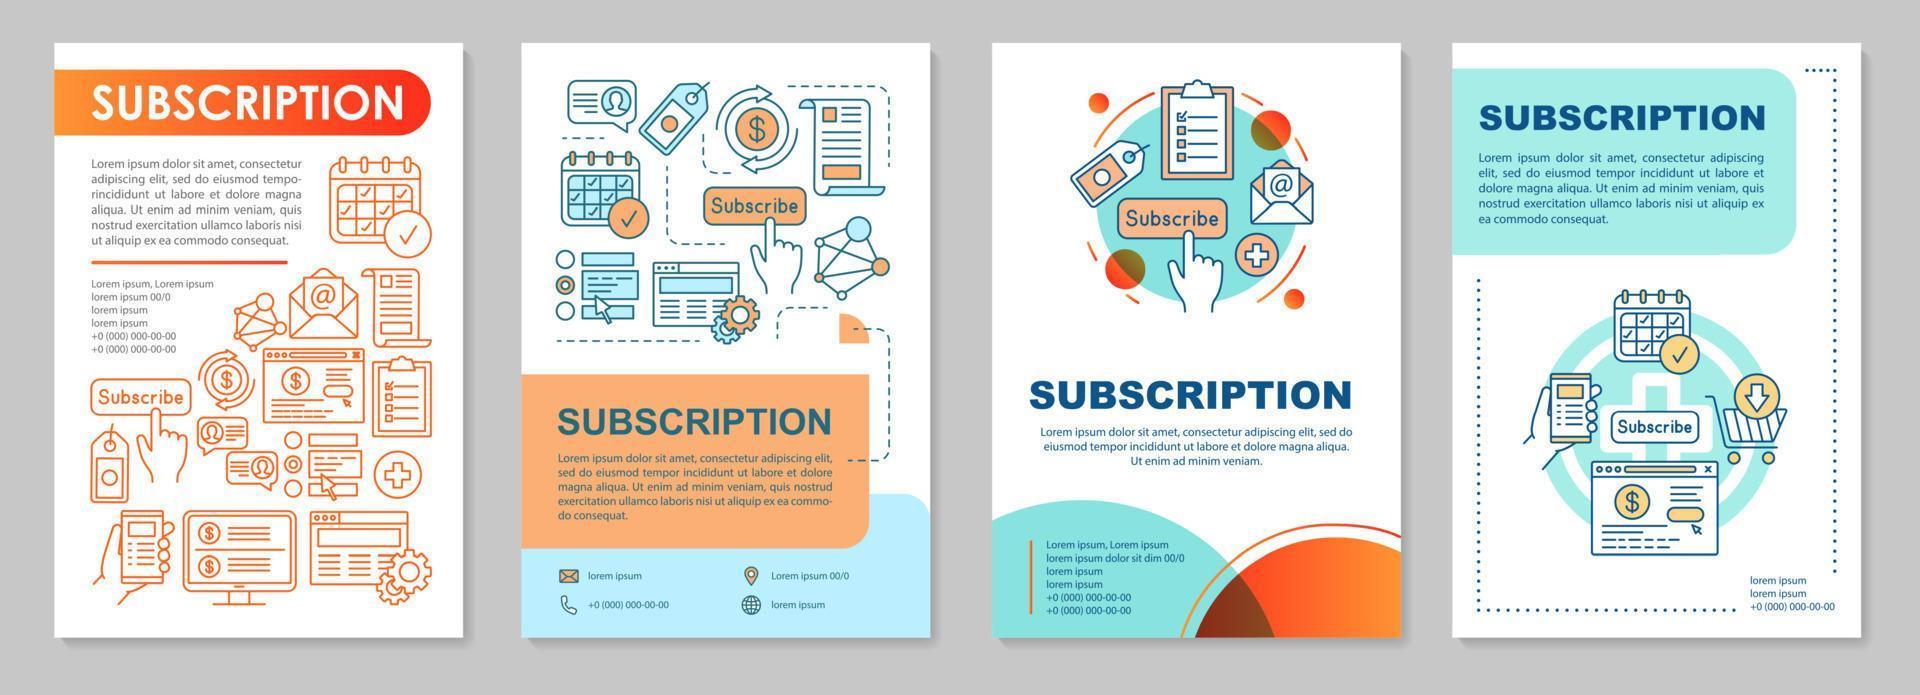 Subscription brochure template layout. Getting newsletter. Flyer, booklet, leaflet print design with linear illustrations. Vector page layouts for magazines, annual reports, advertising posters